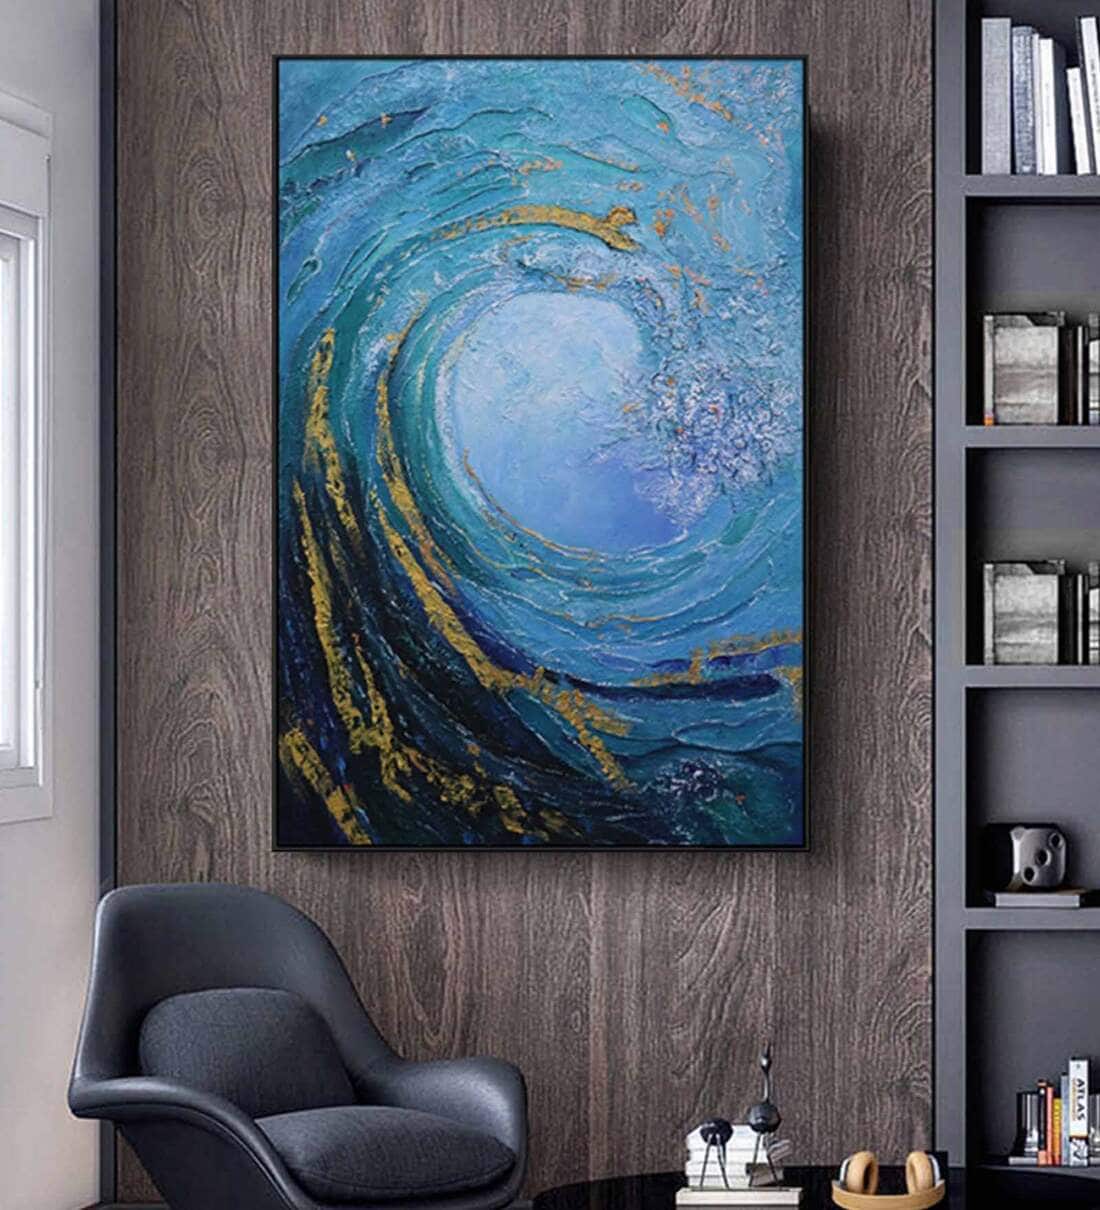 oil and water art